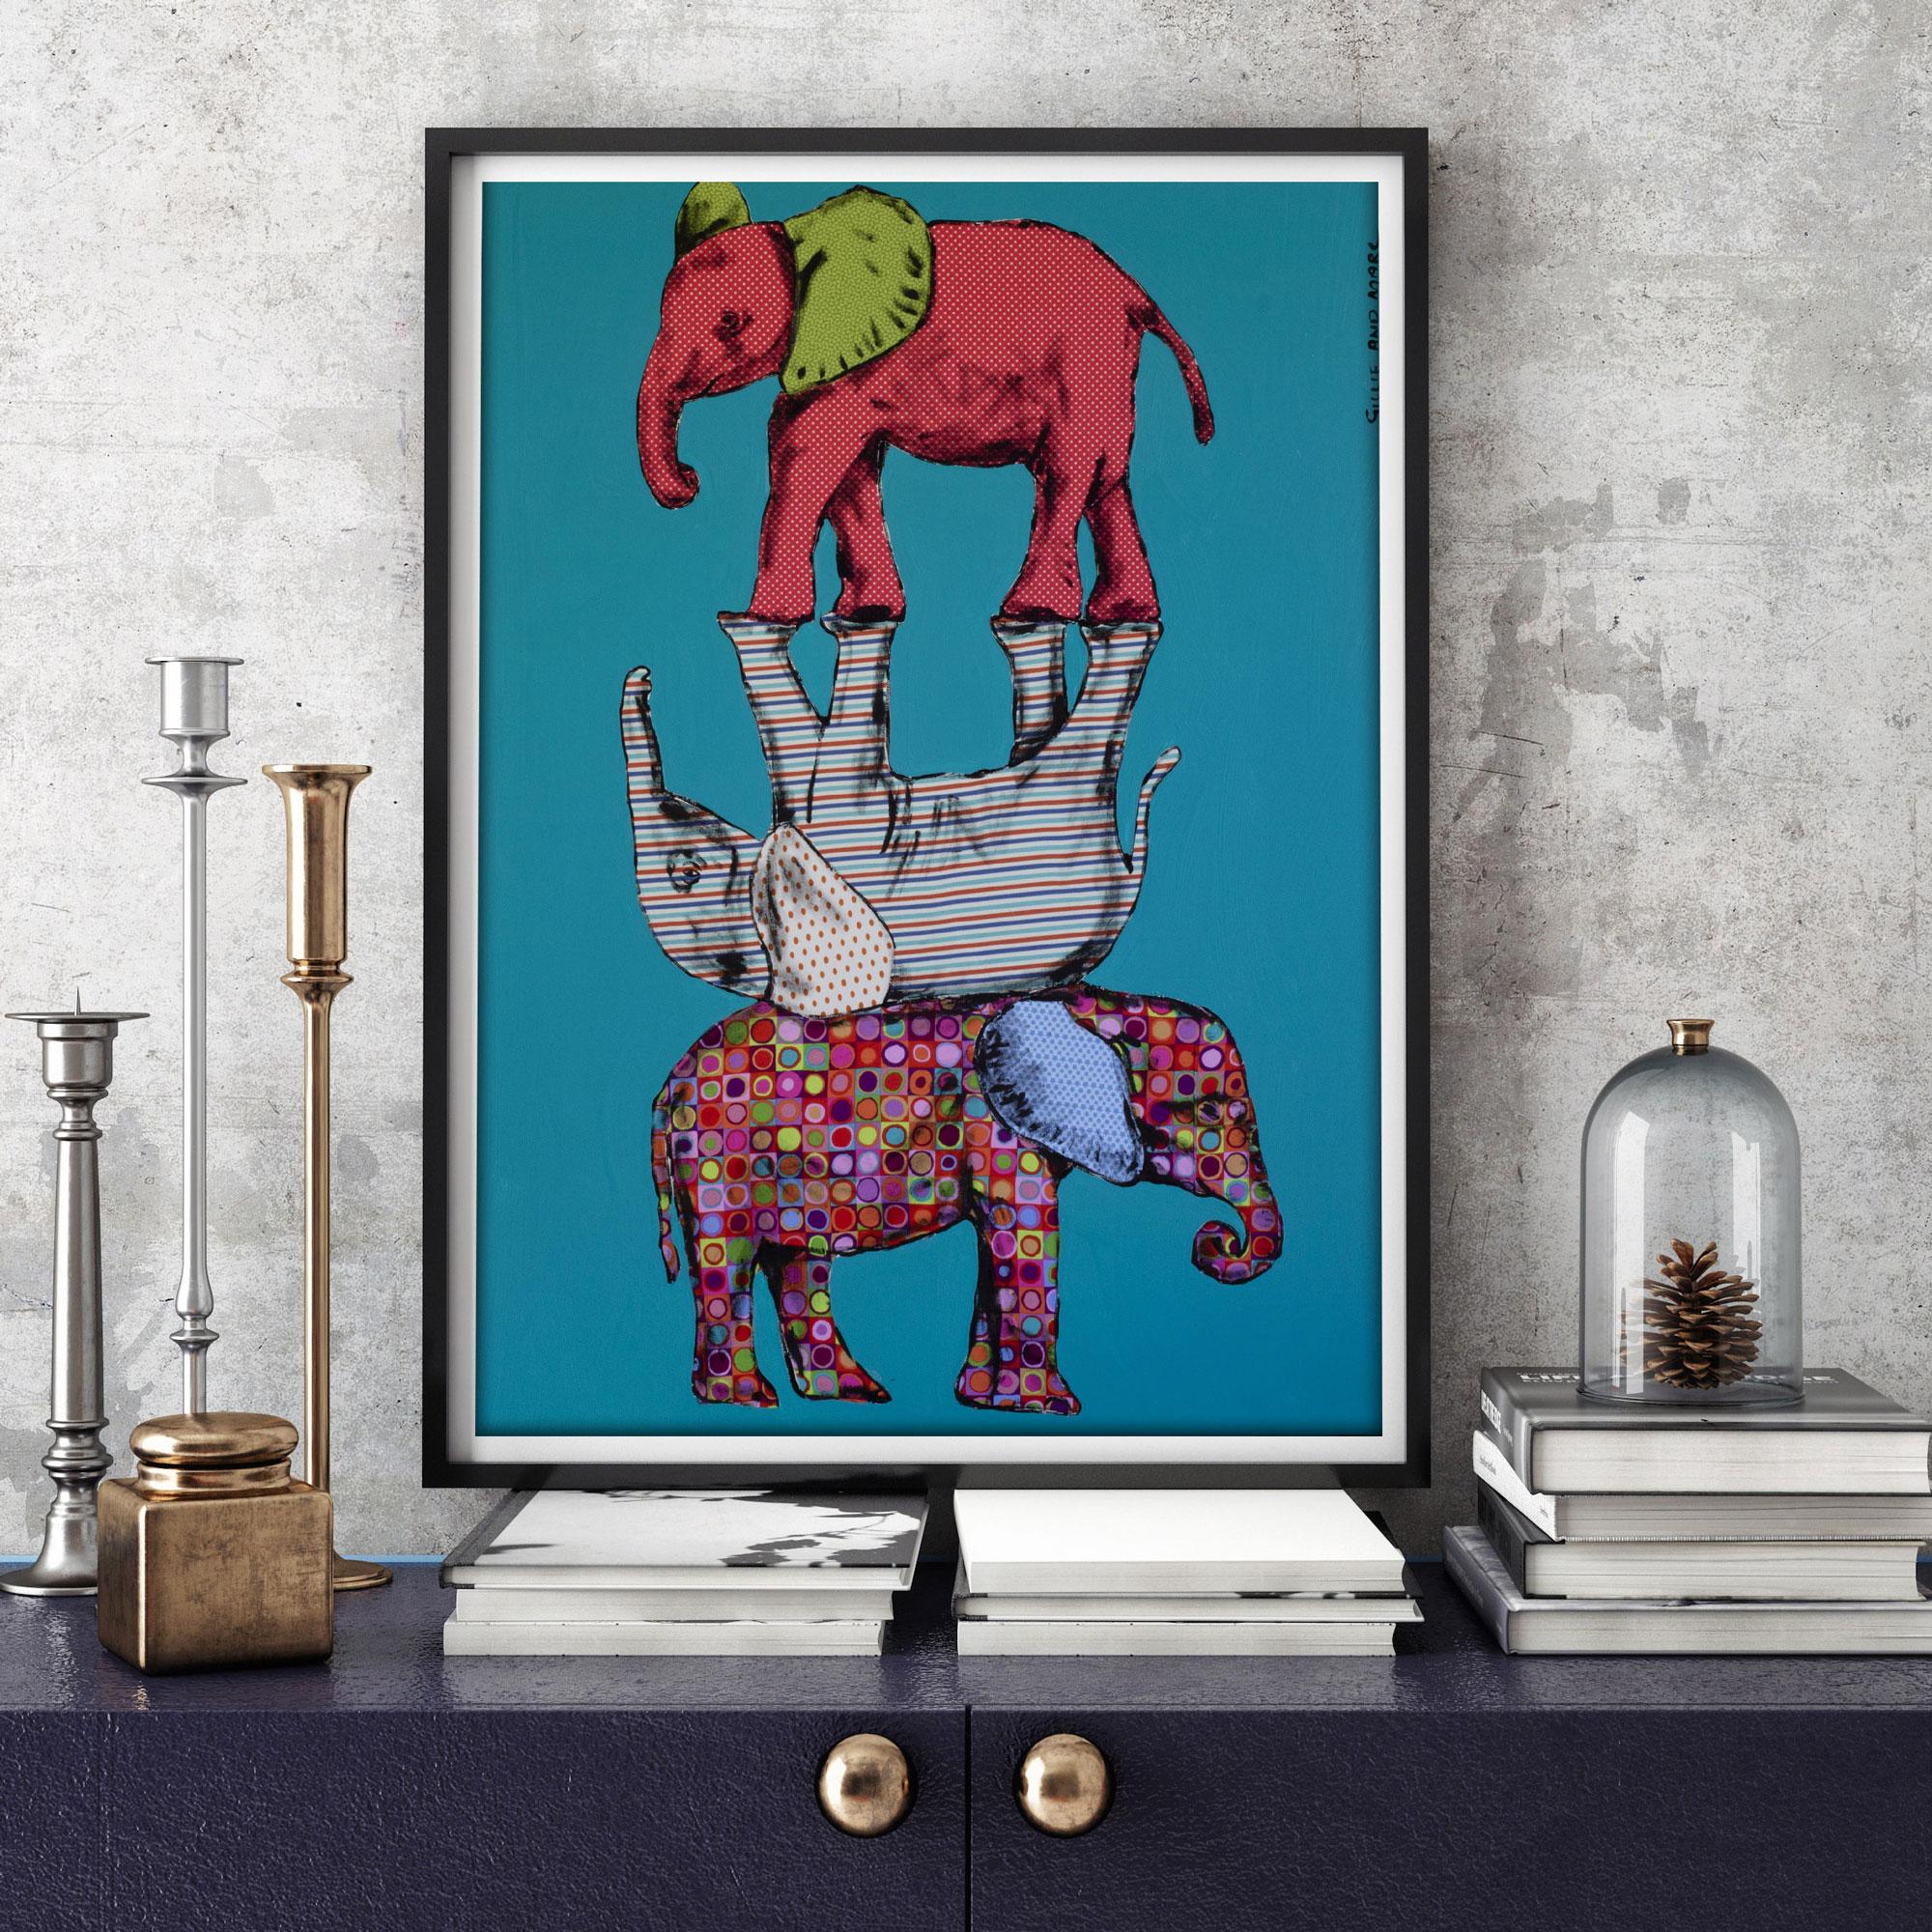 Animal Print - Gillie and Marc - Art - Limited Edition - Wildlife - Elephant - Painting by Gillie and Marc Schattner